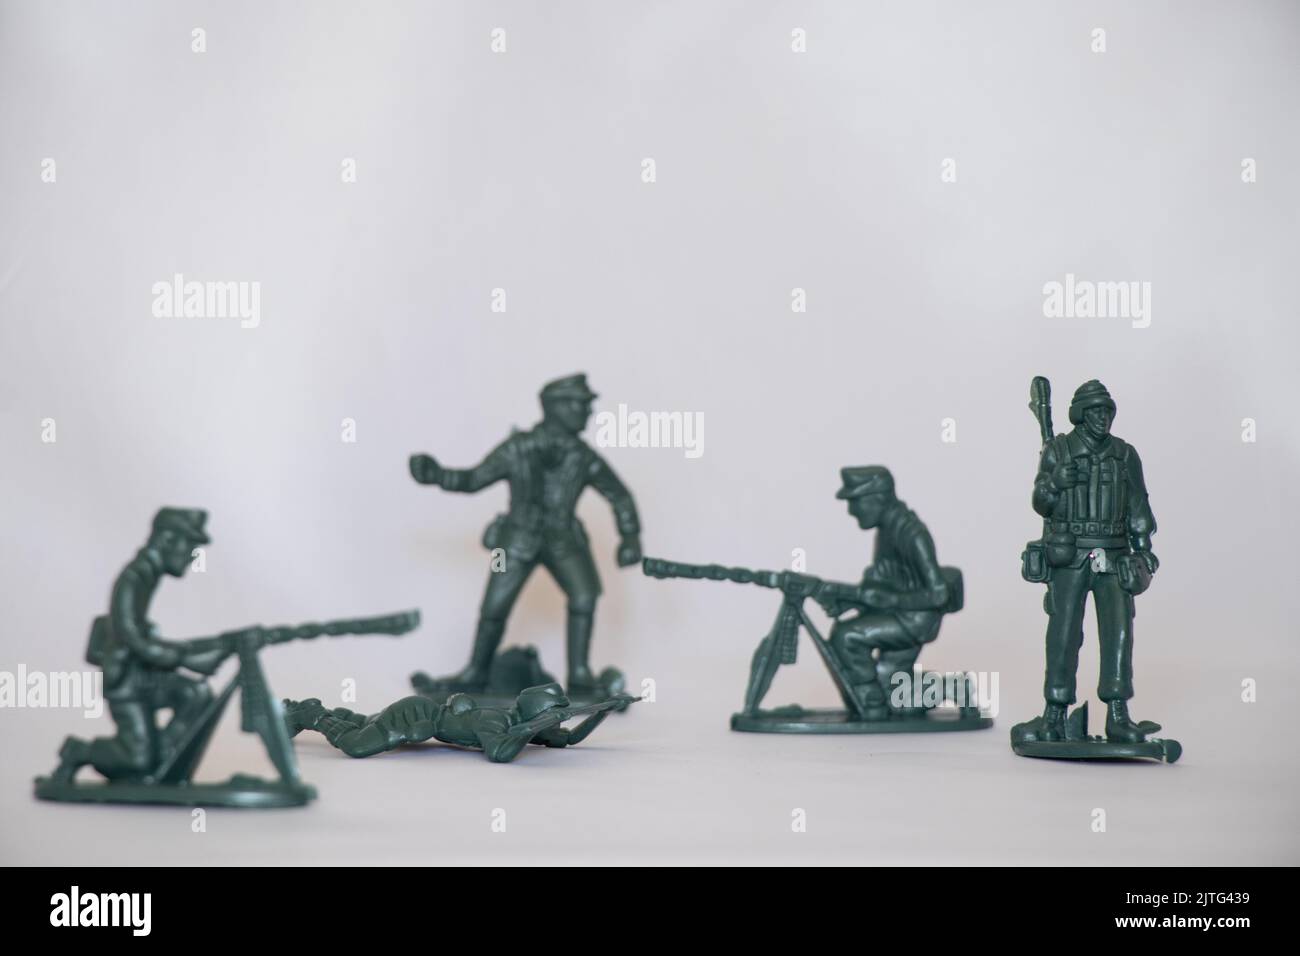 Children's plastic soldiers on a white background close-up, game Stock Photo